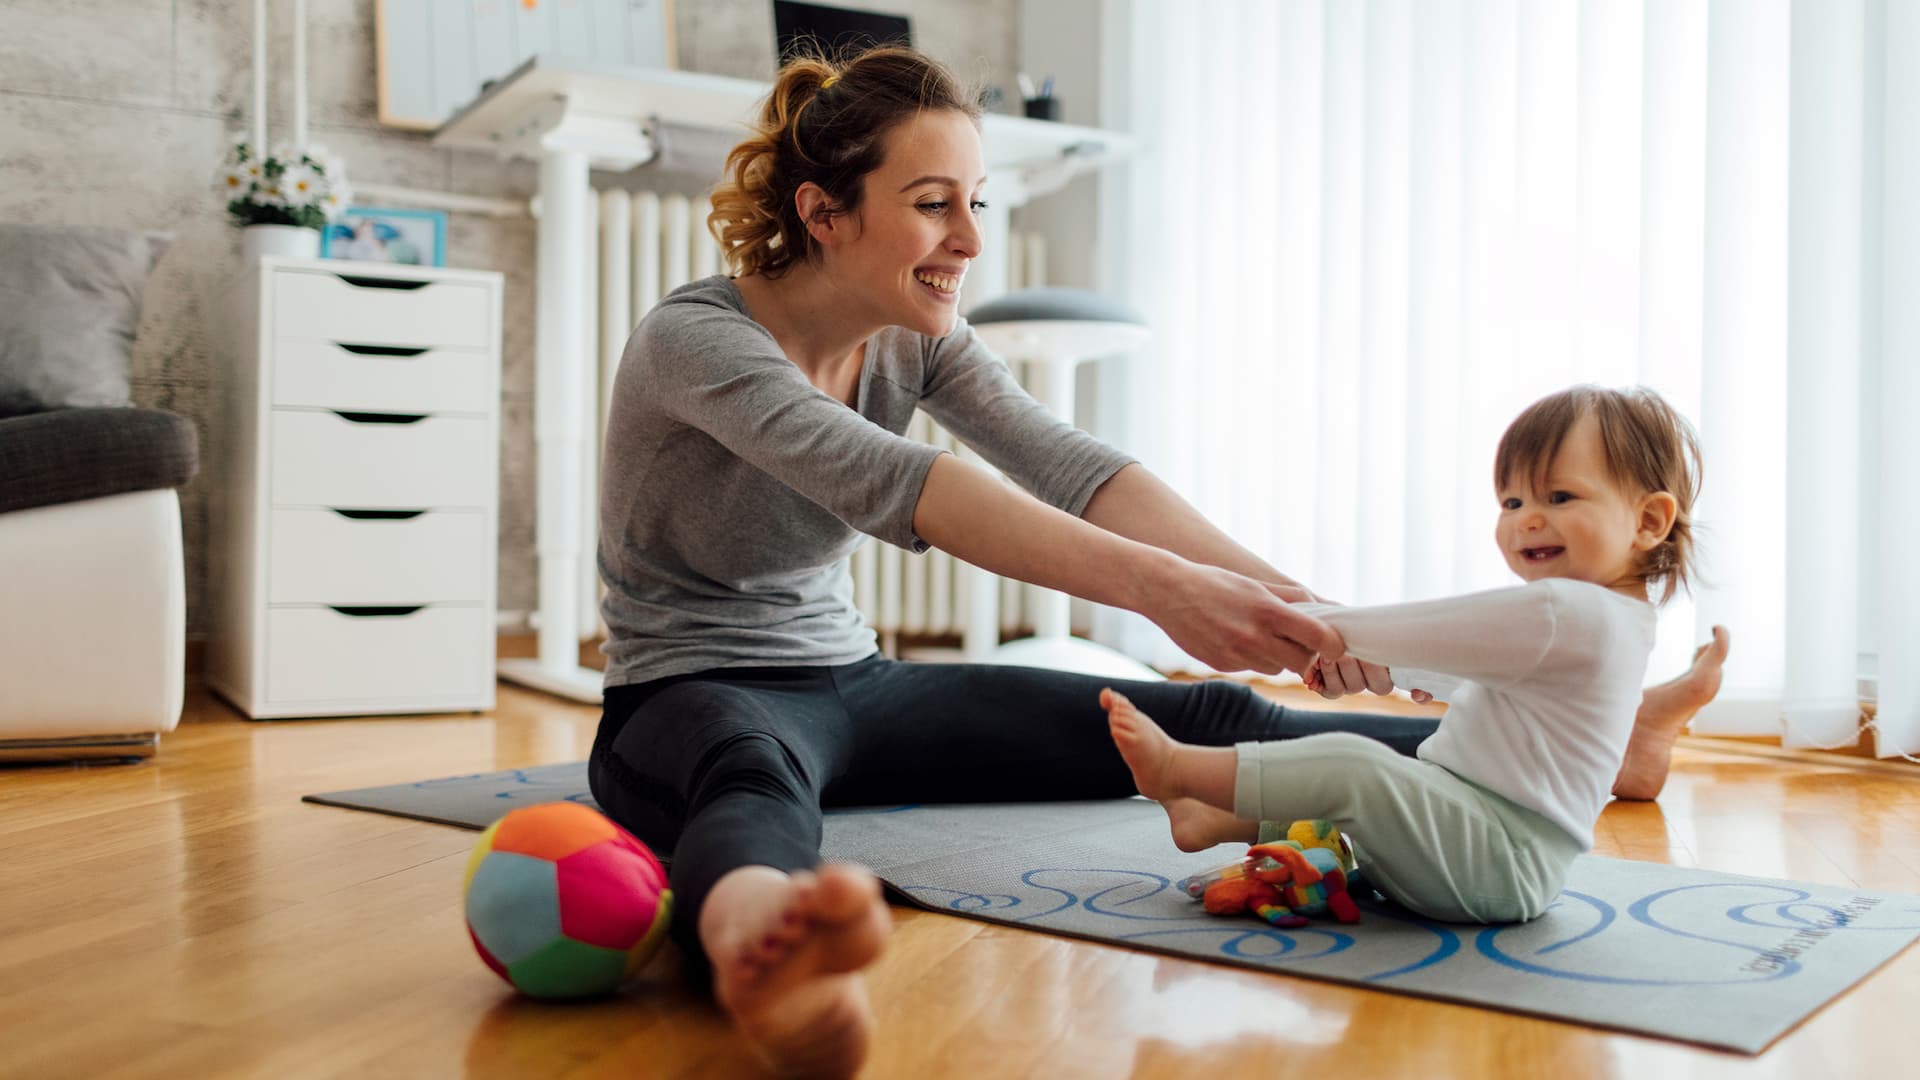 It’s possible for parents of young kids to fit in a workout. Here are a few tips that will help. 